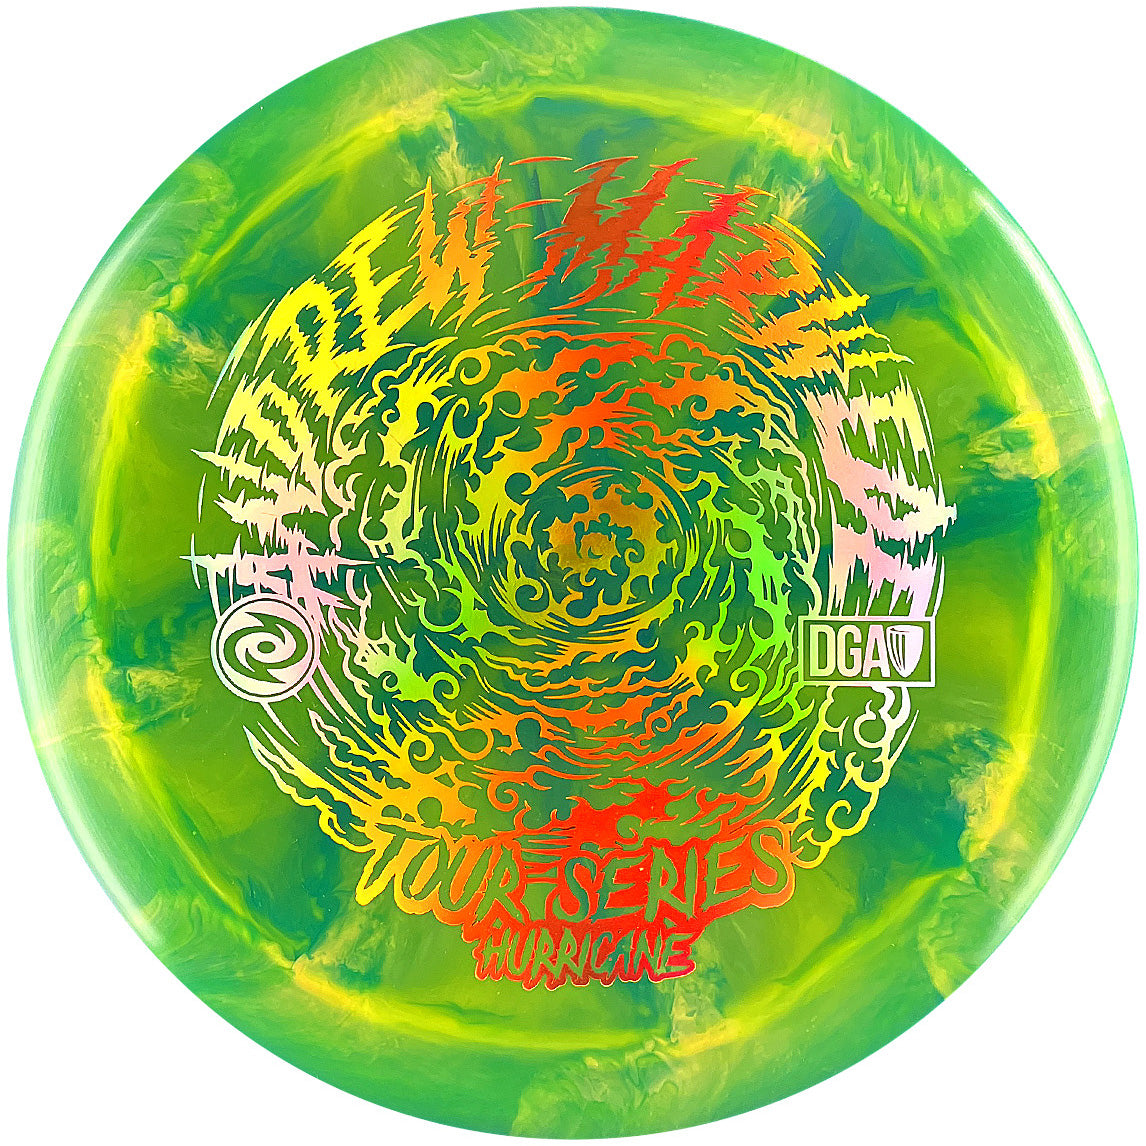 DGA Proline Swirl Hurricane Distance Driver with 2022 Andrew Marwede Tour Series Stamp - Speed 12